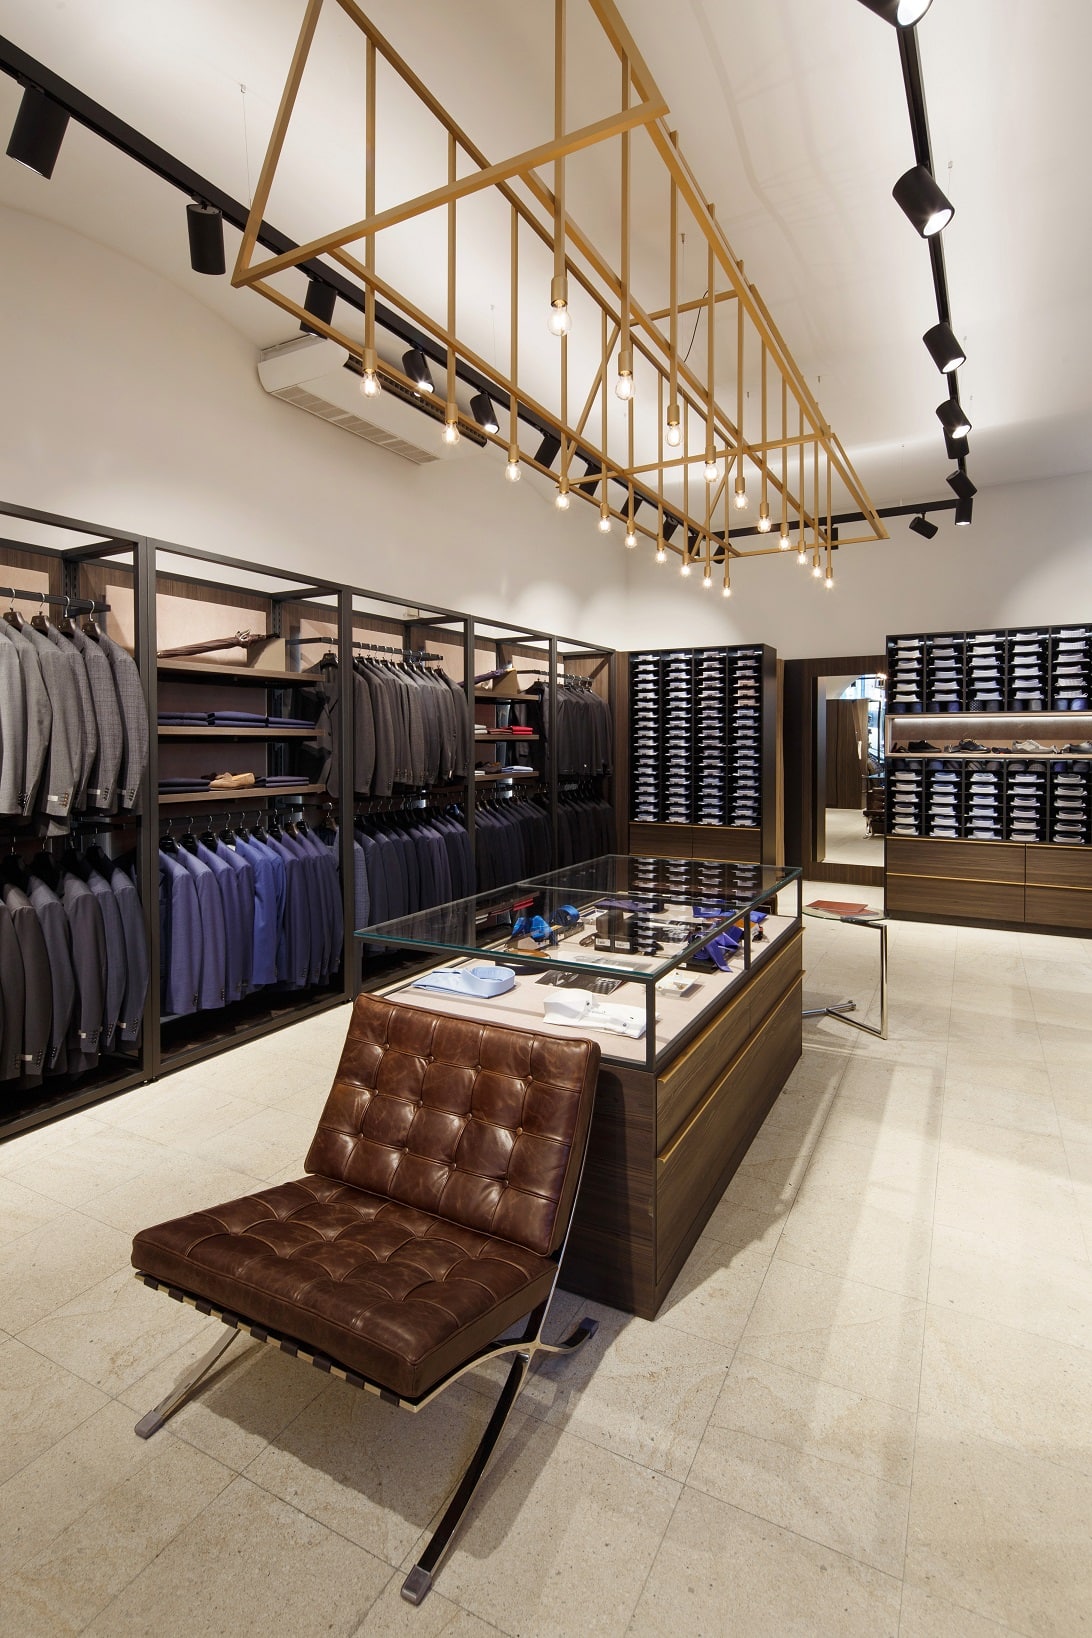 Bespoke Retail Furniture and Joinery for a Store in Vienna - ATEPAA®